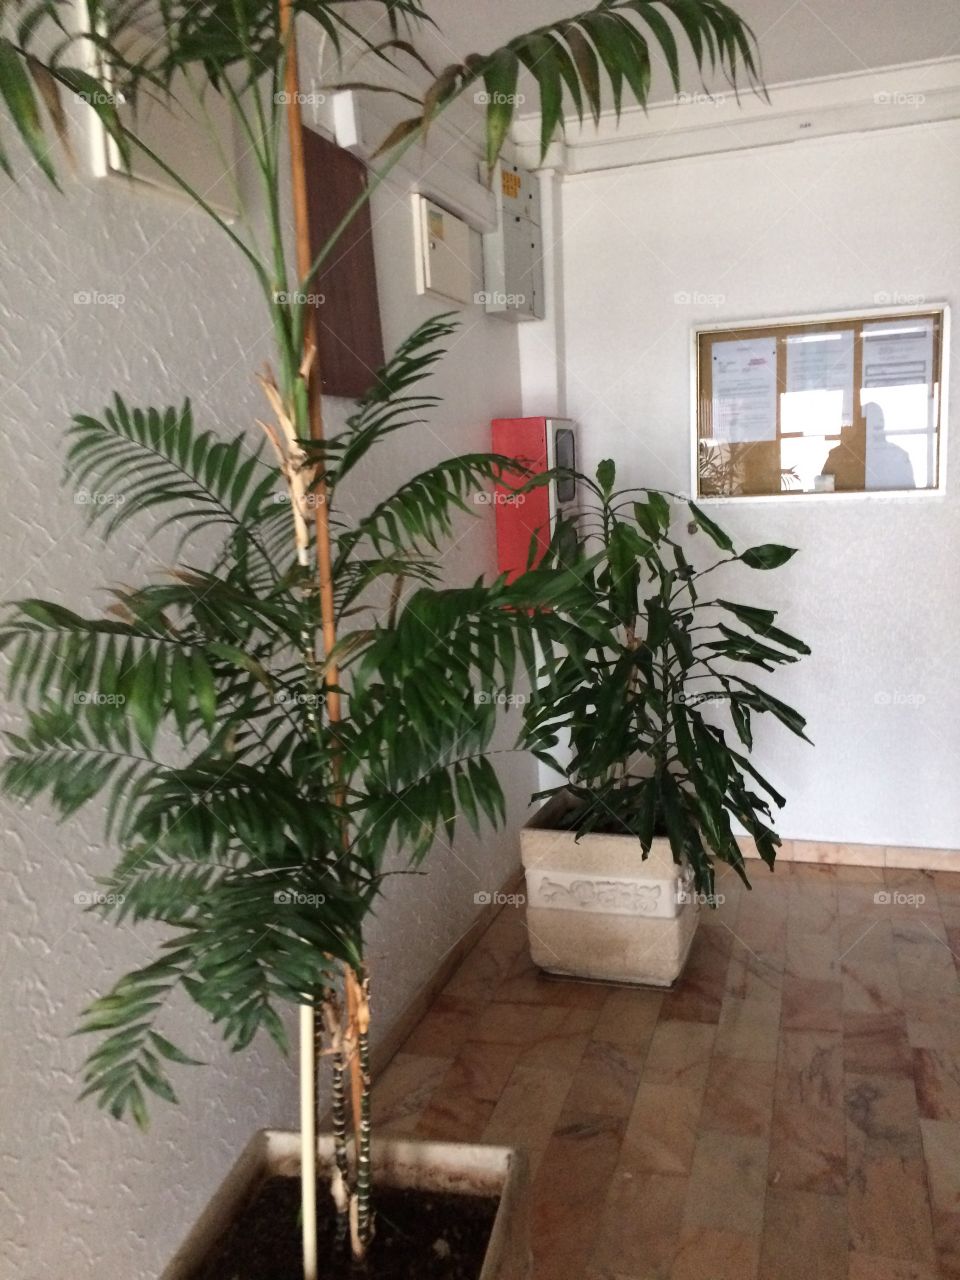 Trees in entrance in building.